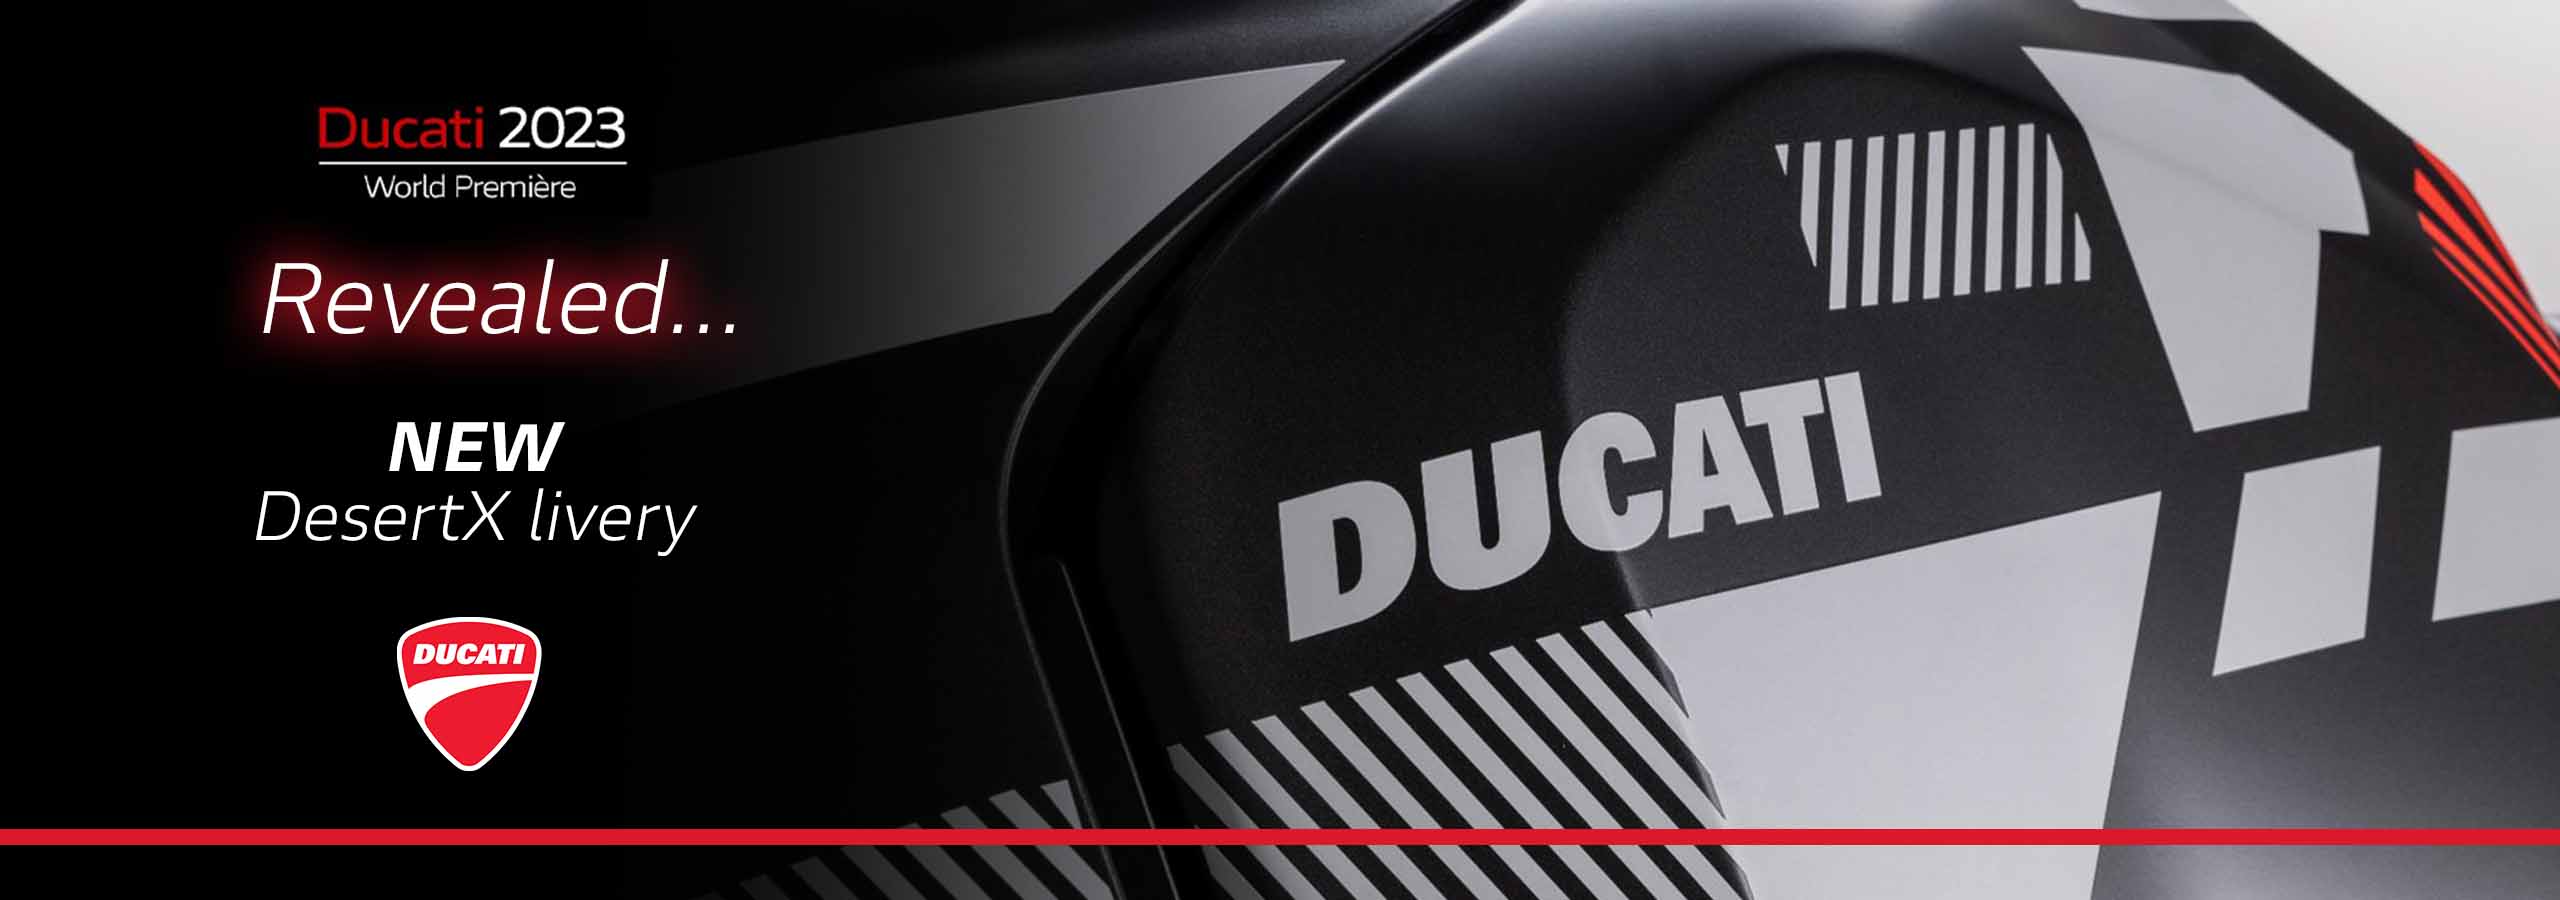 Revealed the All-new Ducati DesertX Livery